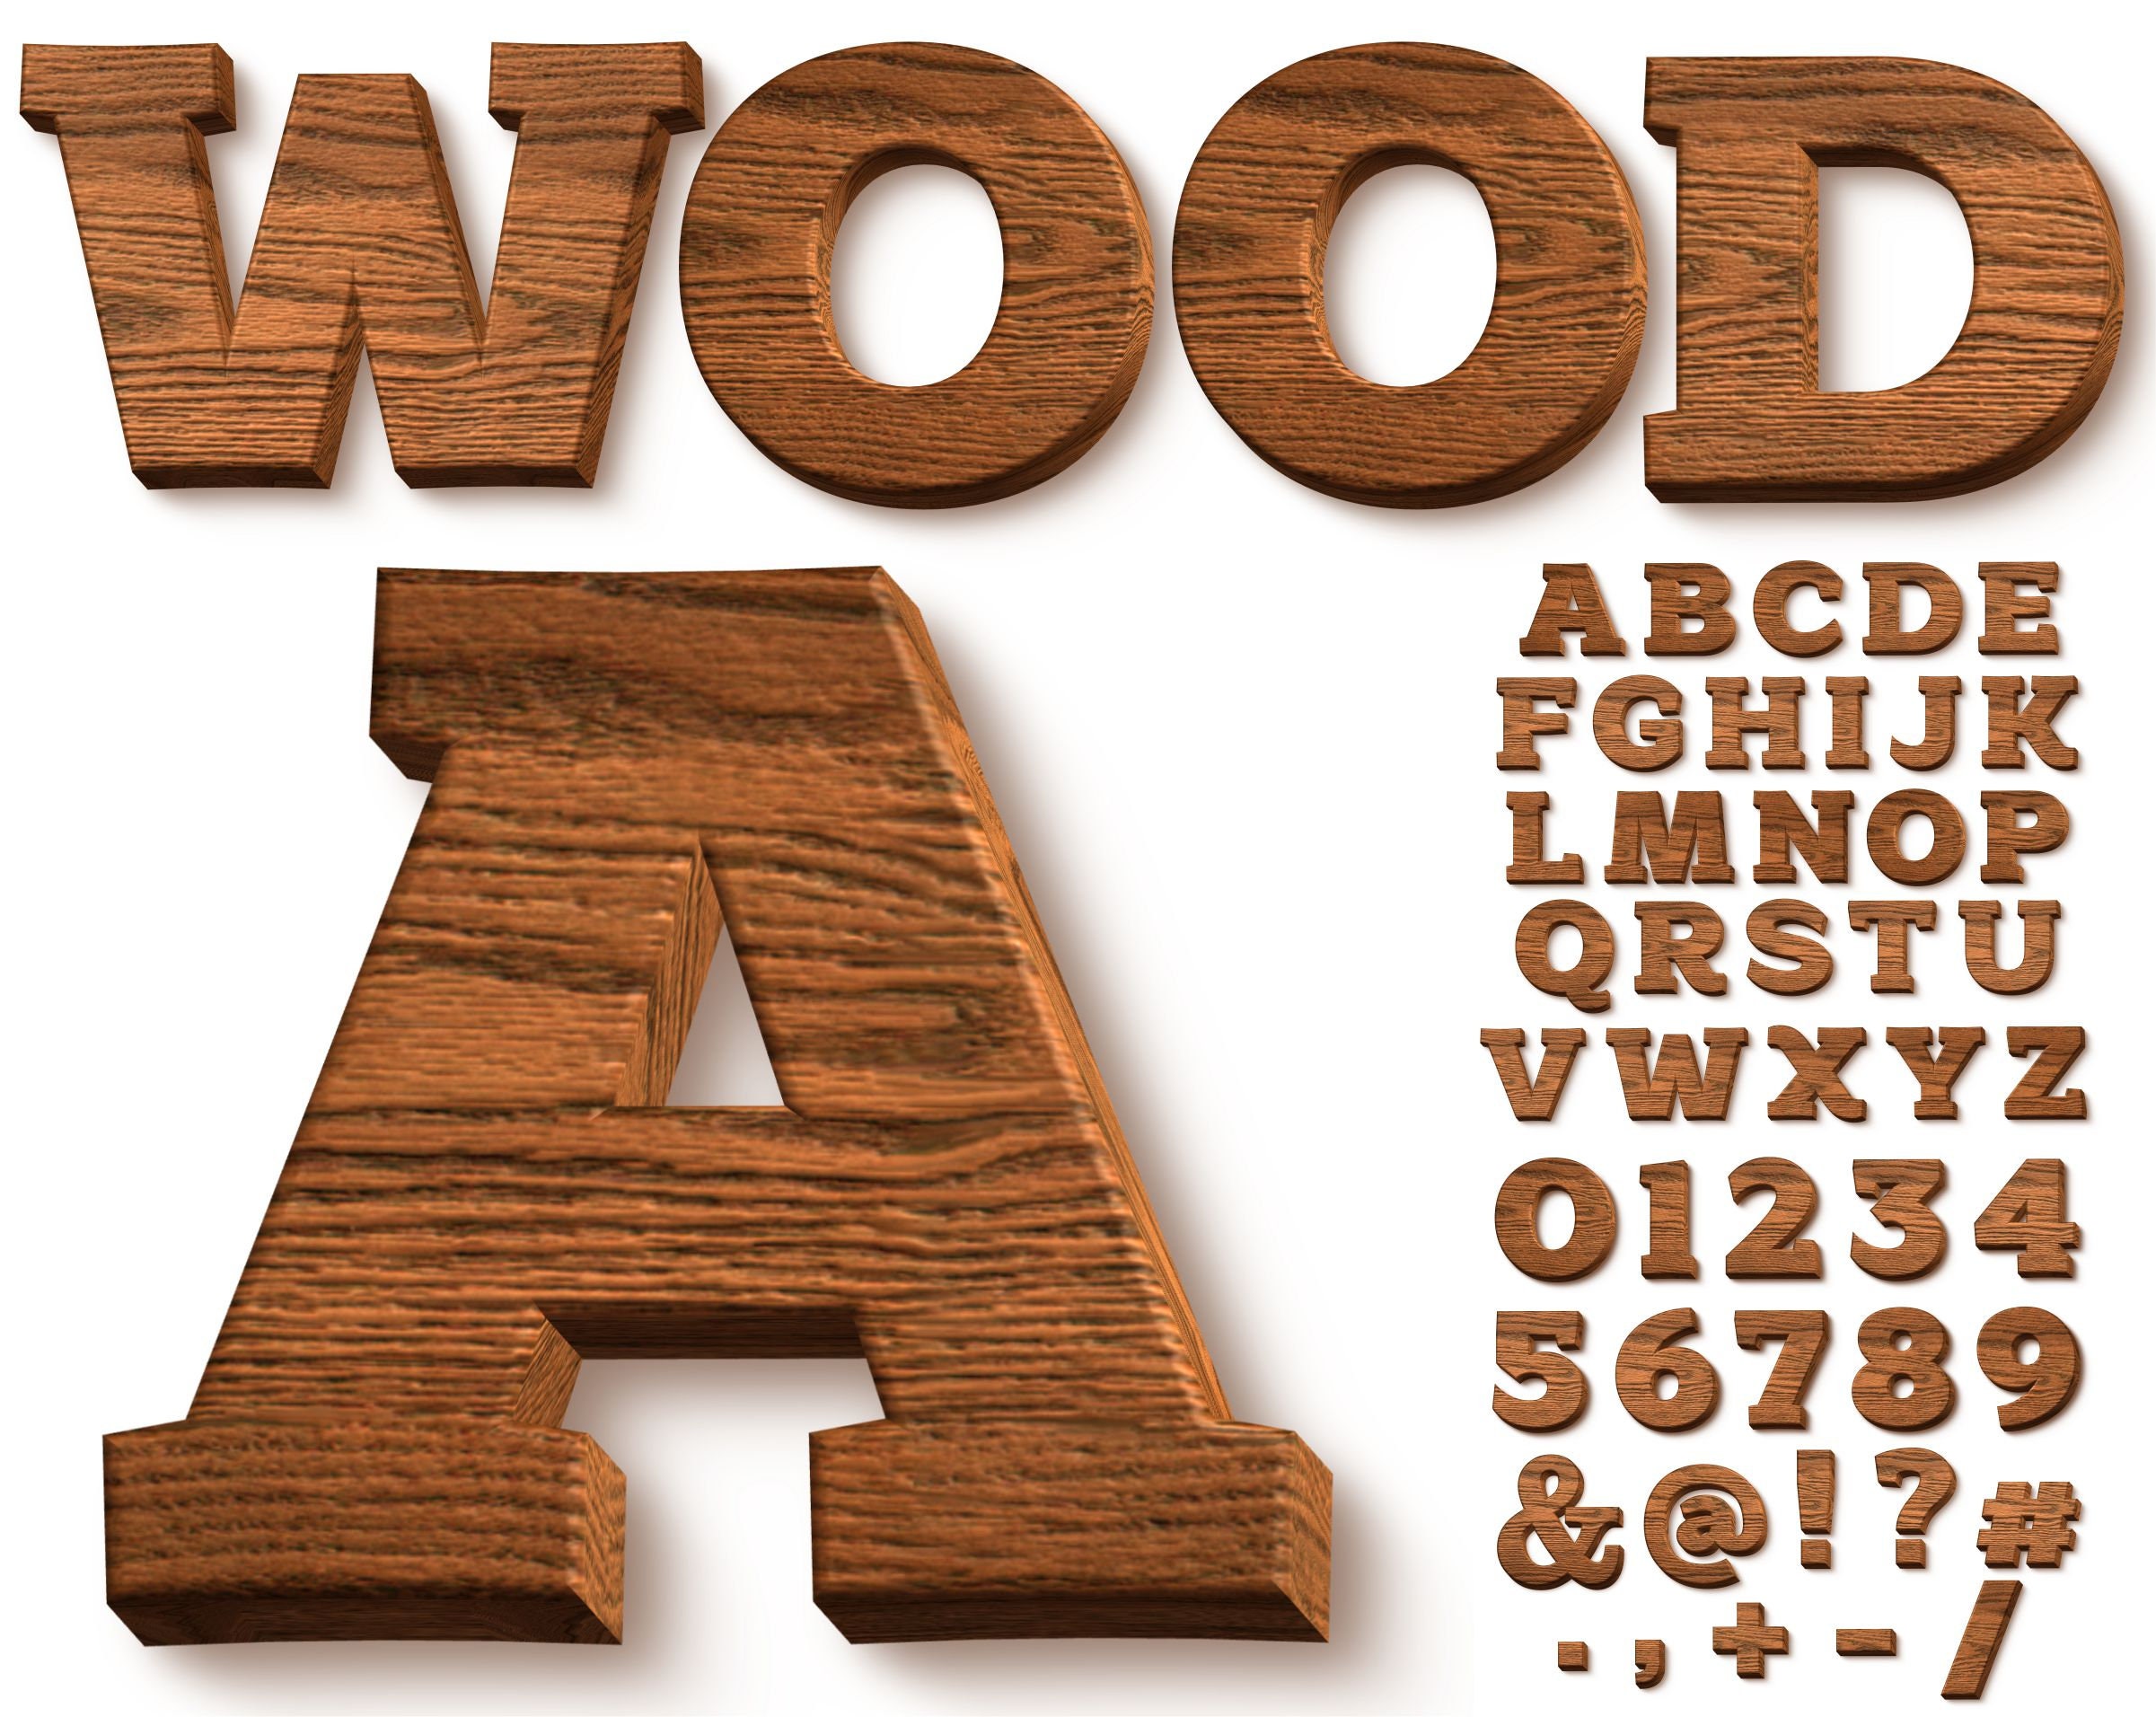 DEEZOMO 6 Inch 3D Log Wooden Letters, Wooden Alphabet Wall Letter for Wall  Decor Decorative - Wood Crafts Standing Letters Slices Sign Board